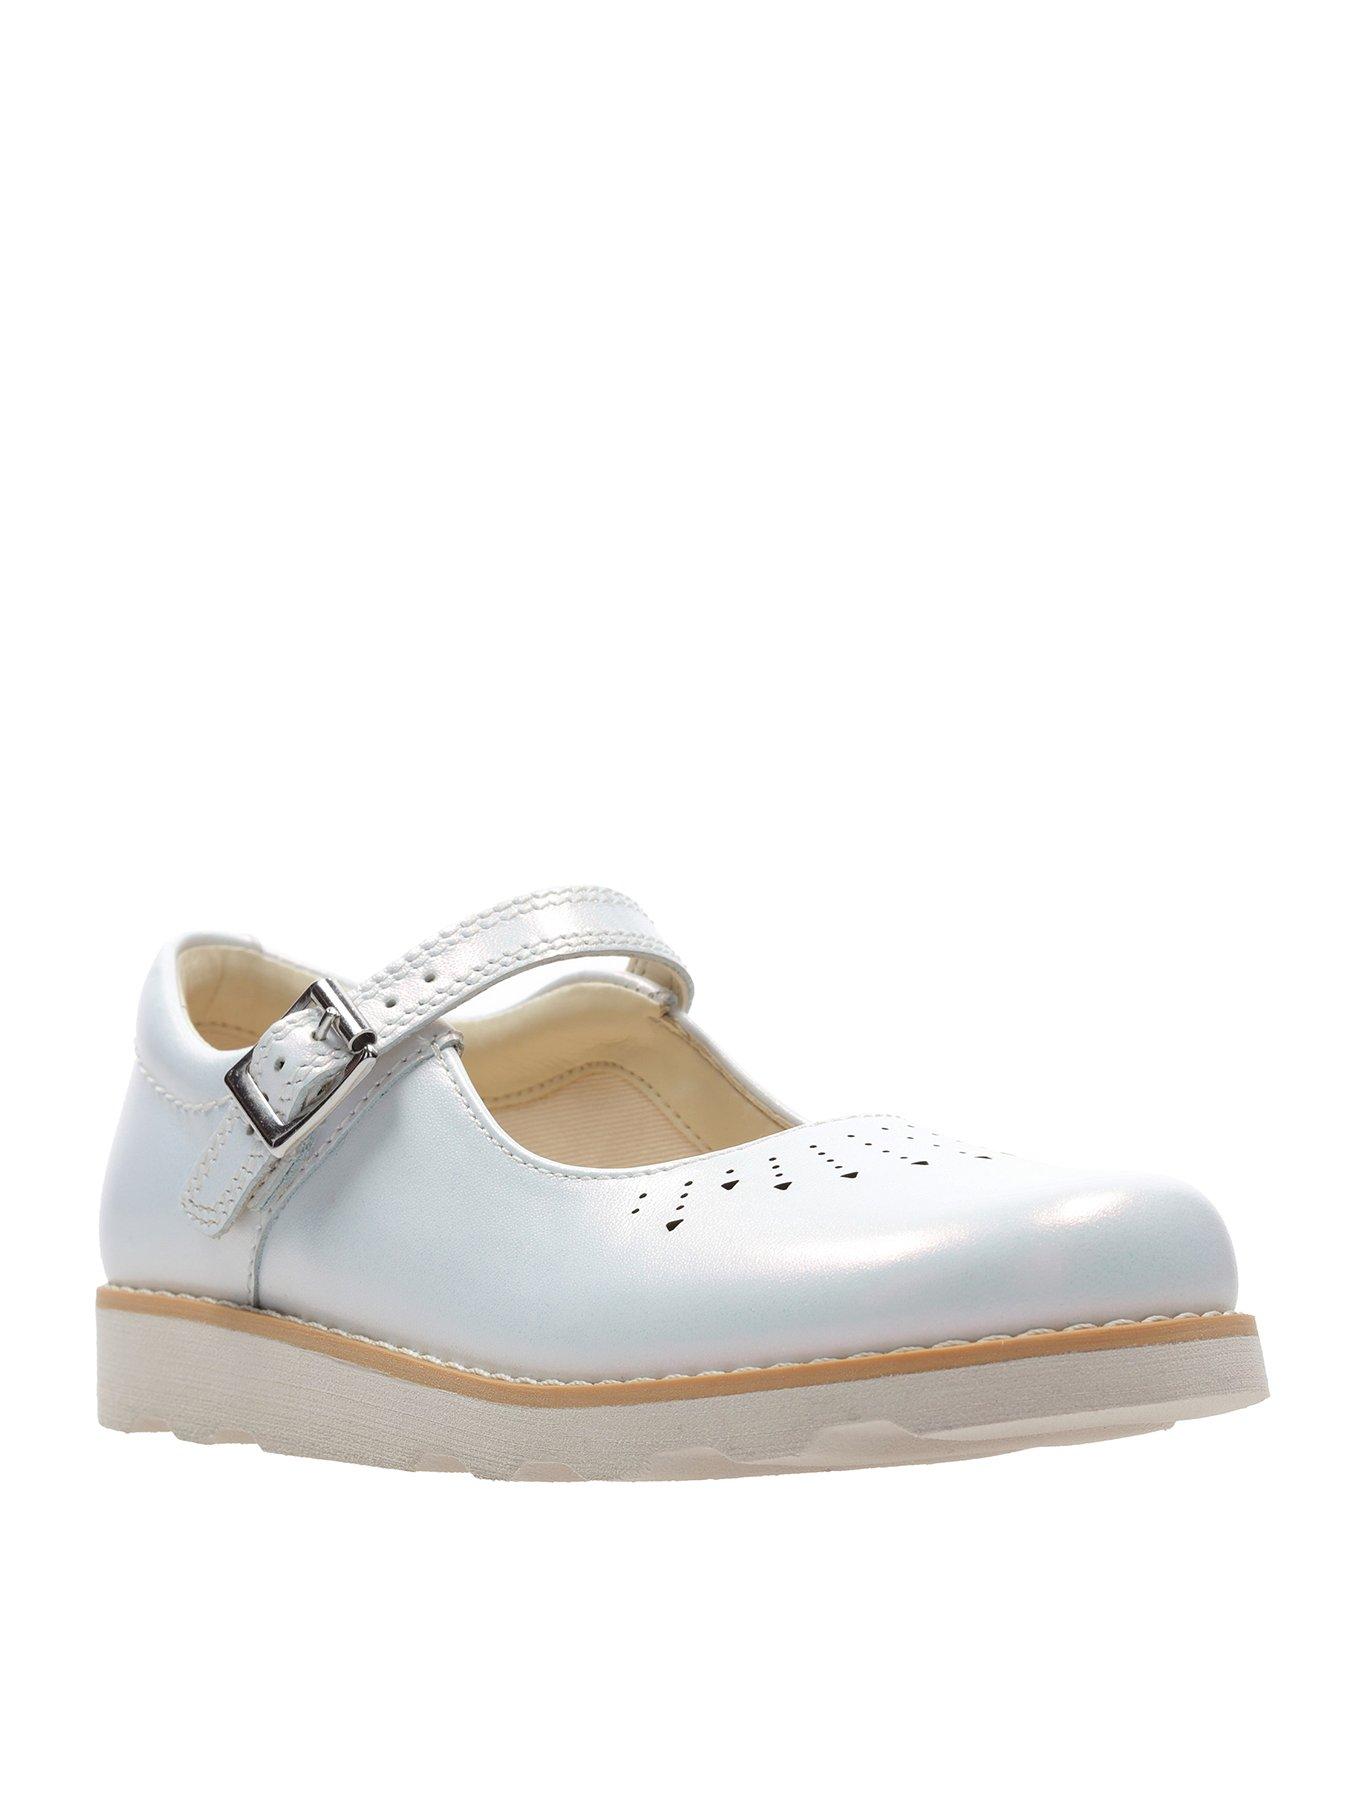 clarks girls white shoes